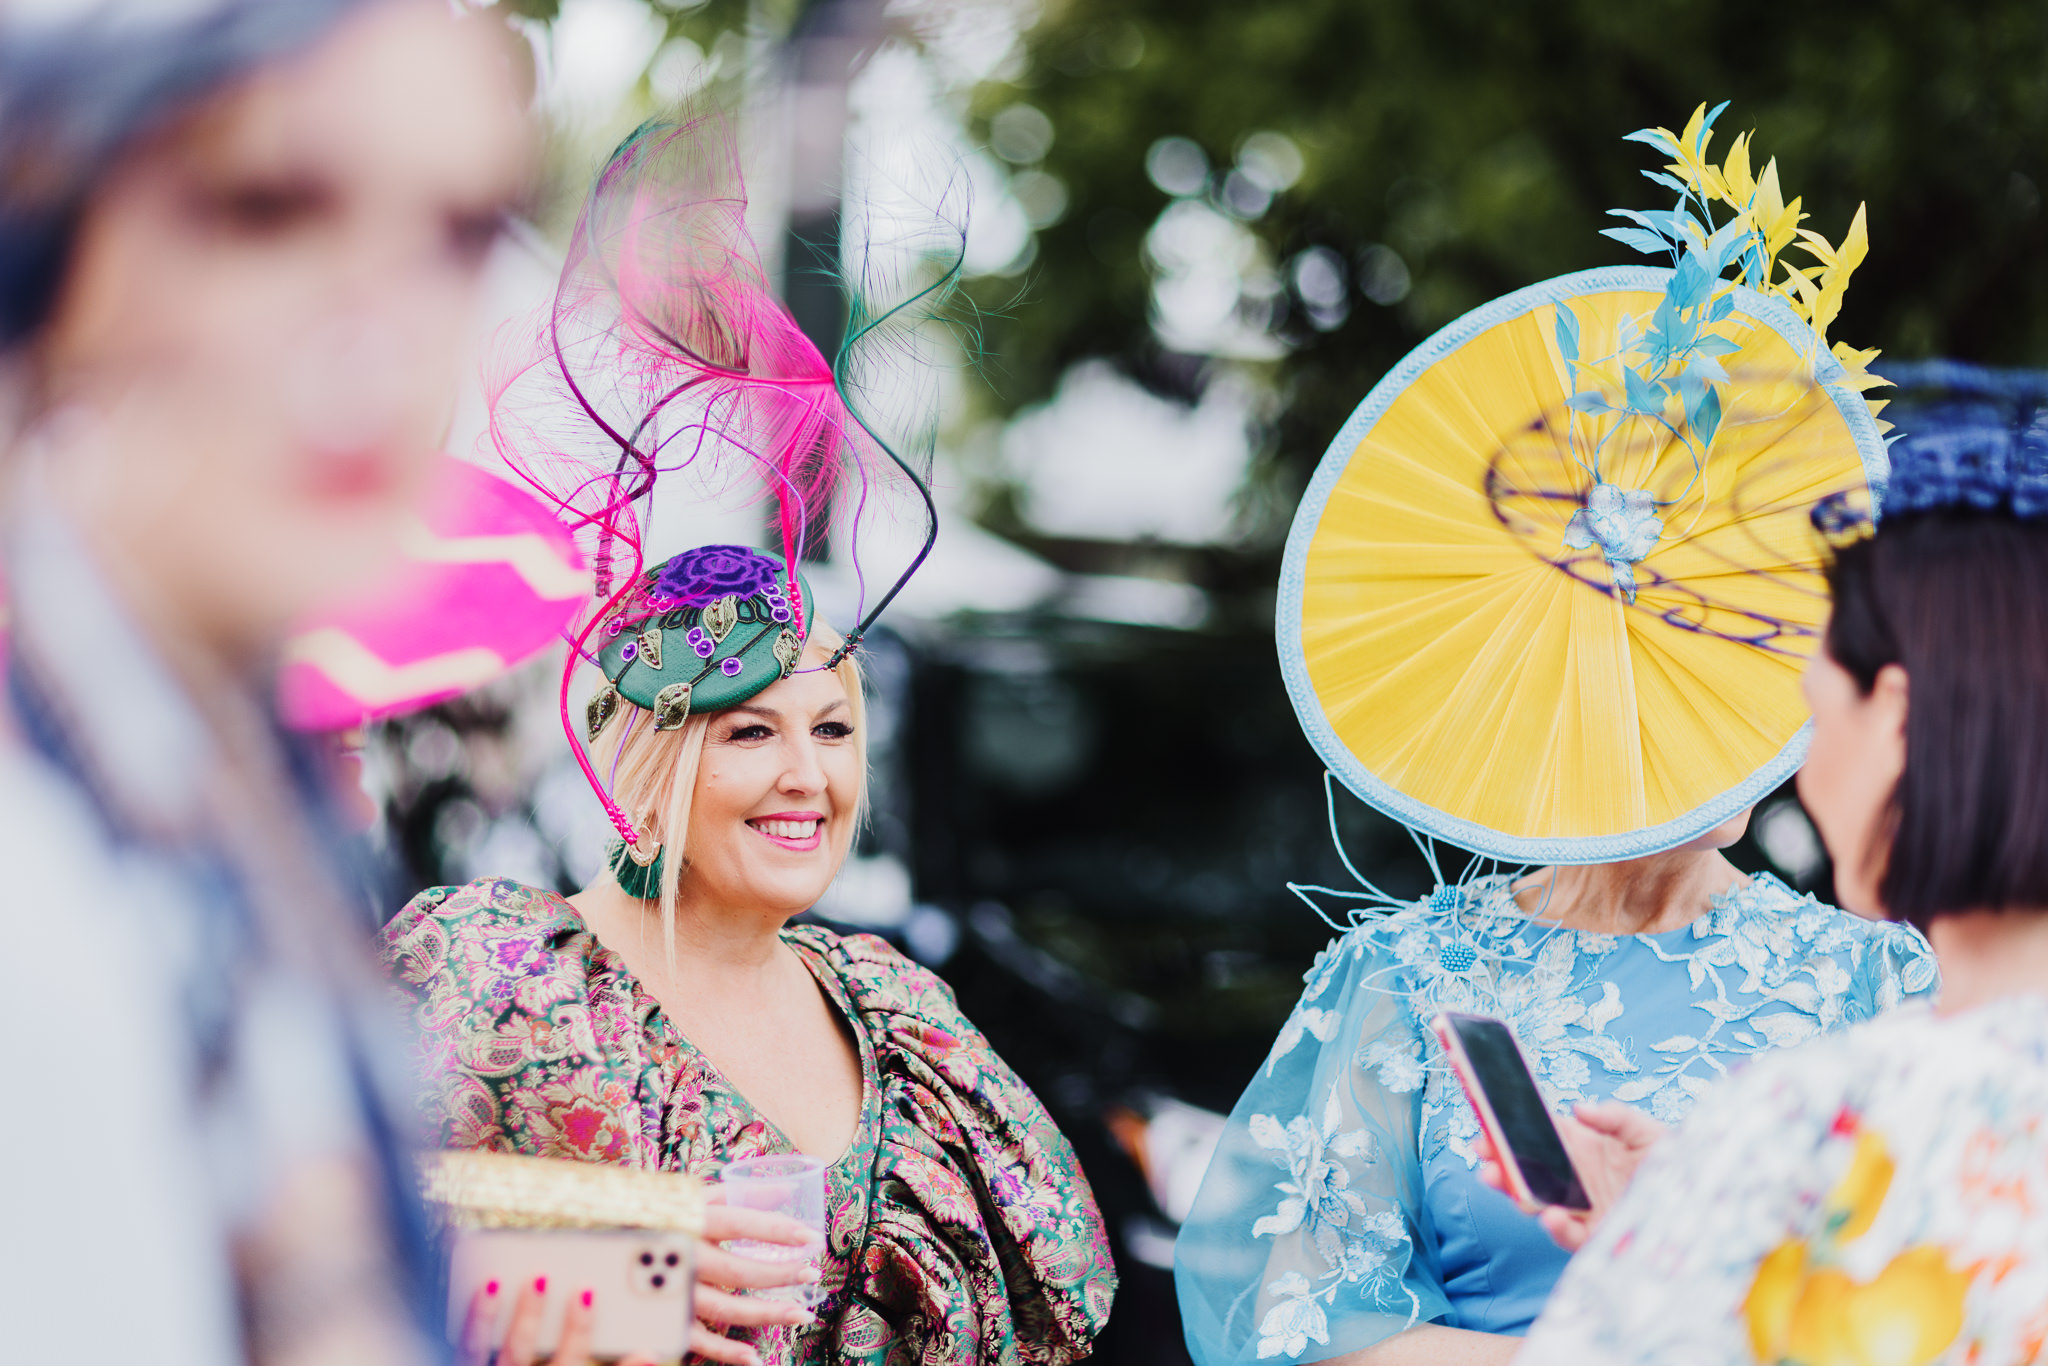 Millinery Award 2022 - Colourful and creative hats at the races